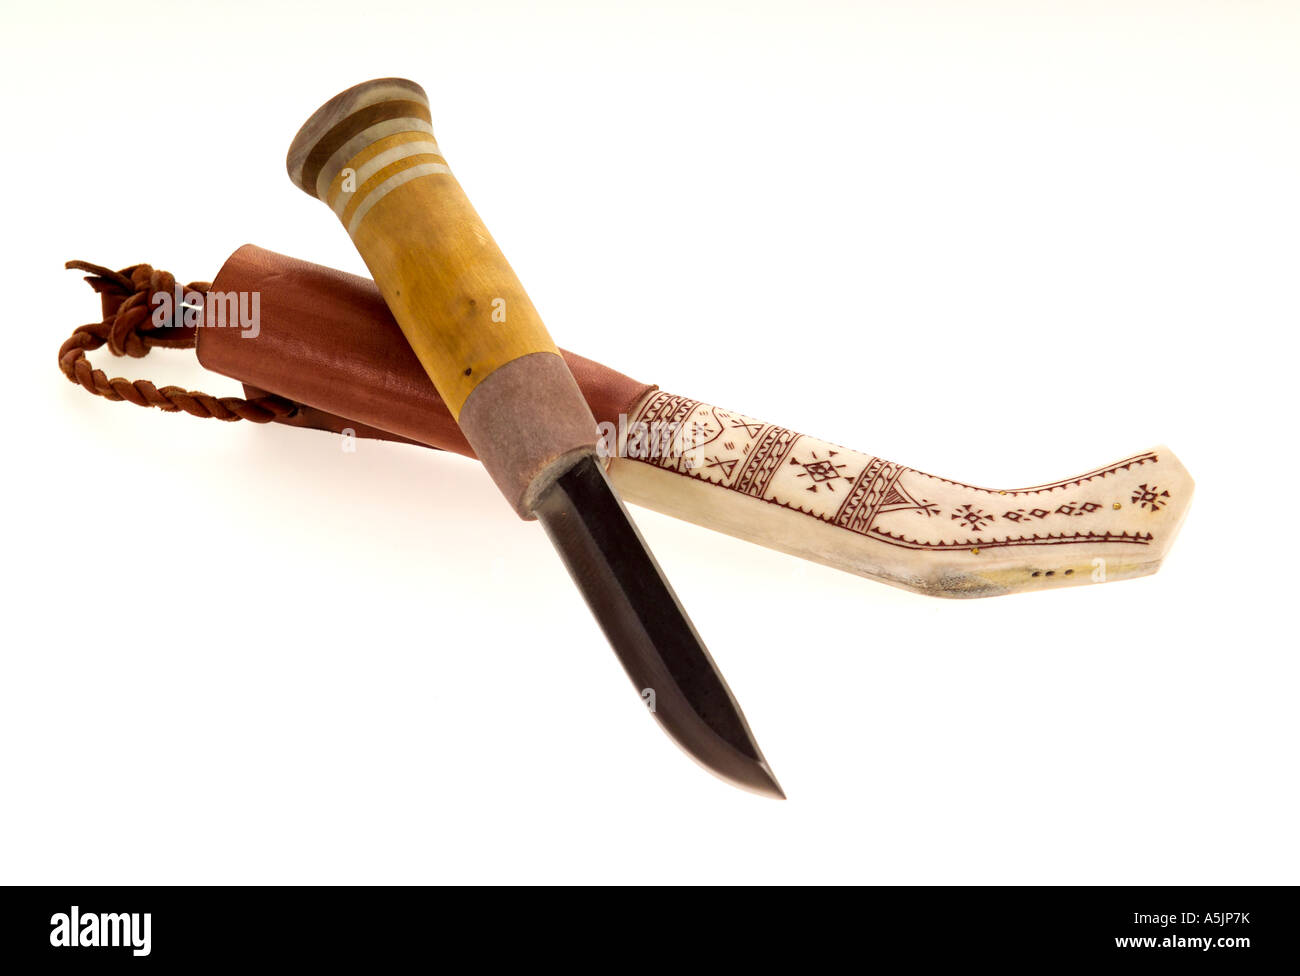 Sami sheath knife decorated with traditional pattern from Northern Sweden  Stock Photo - Alamy